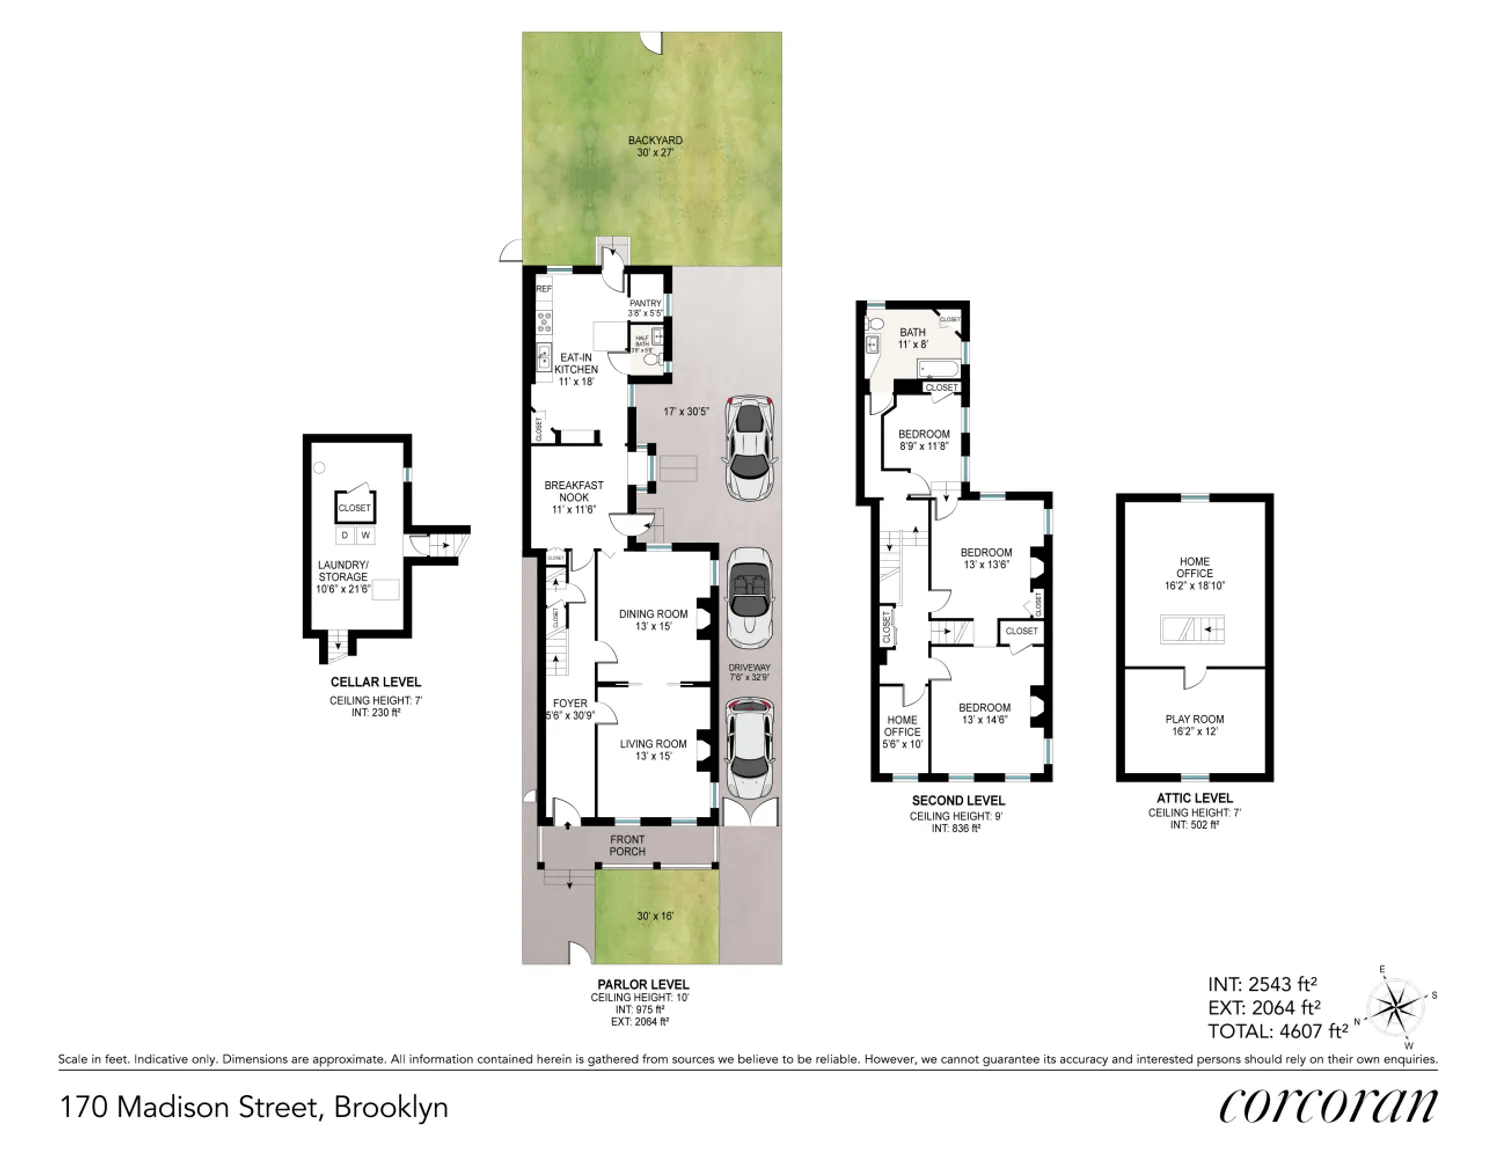 floorplan showing three floors plus cellar and driveway for parking